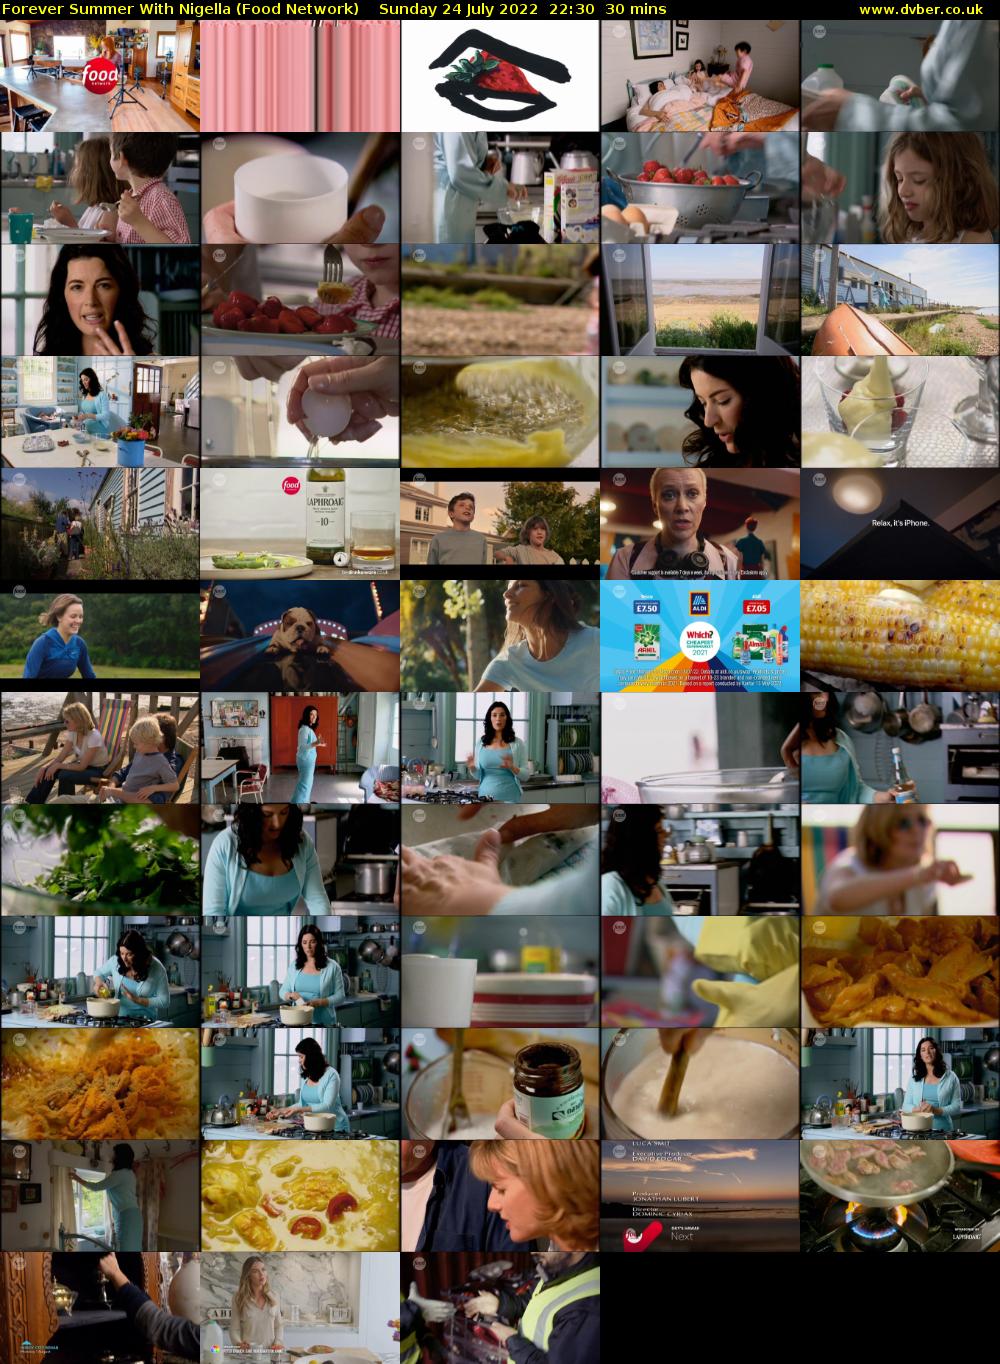 Forever Summer with Nigella (Food Network) Sunday 24 July 2022 22:30 - 23:00